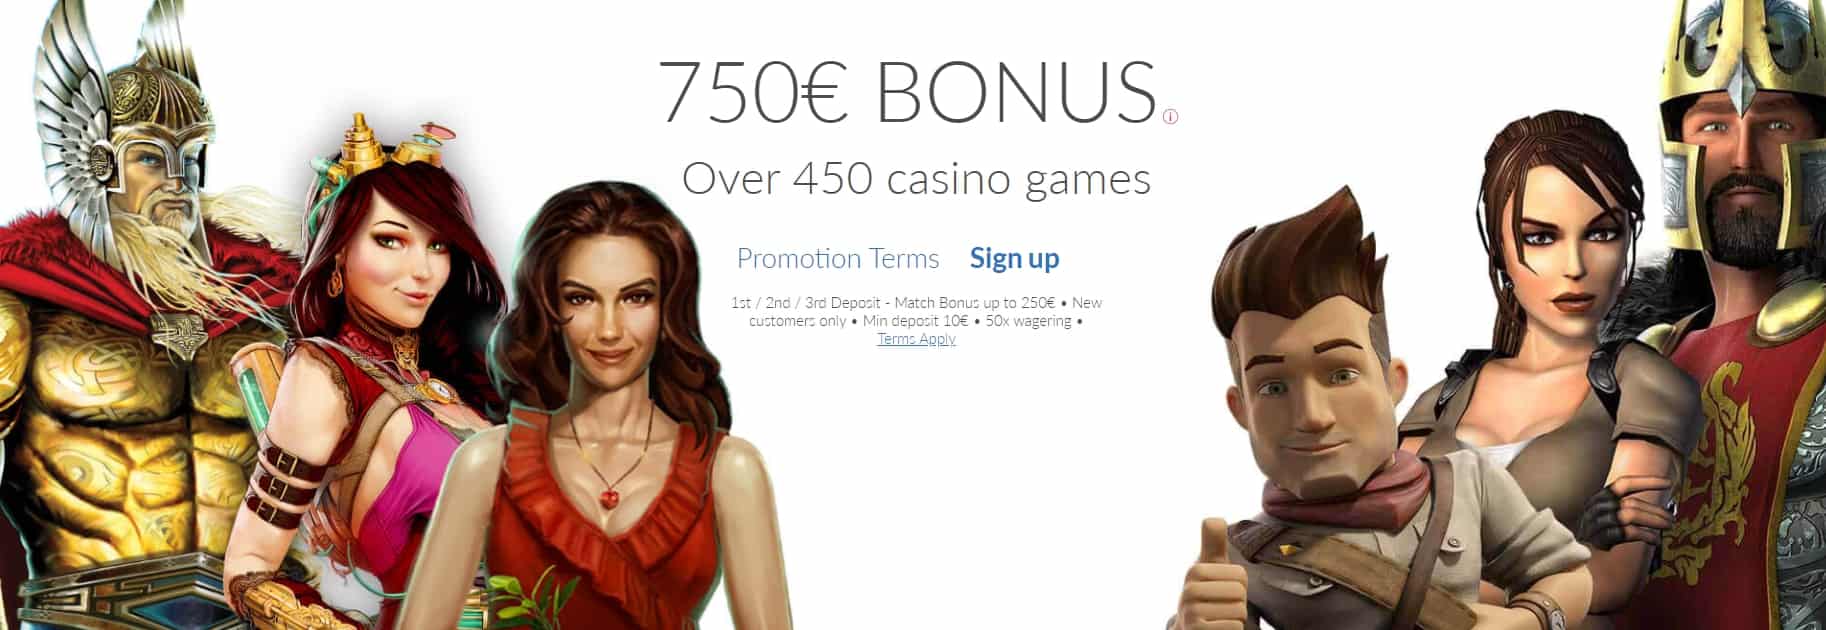 Ruby Fortune Casino 2020 Review Use Paysafecard In Casino